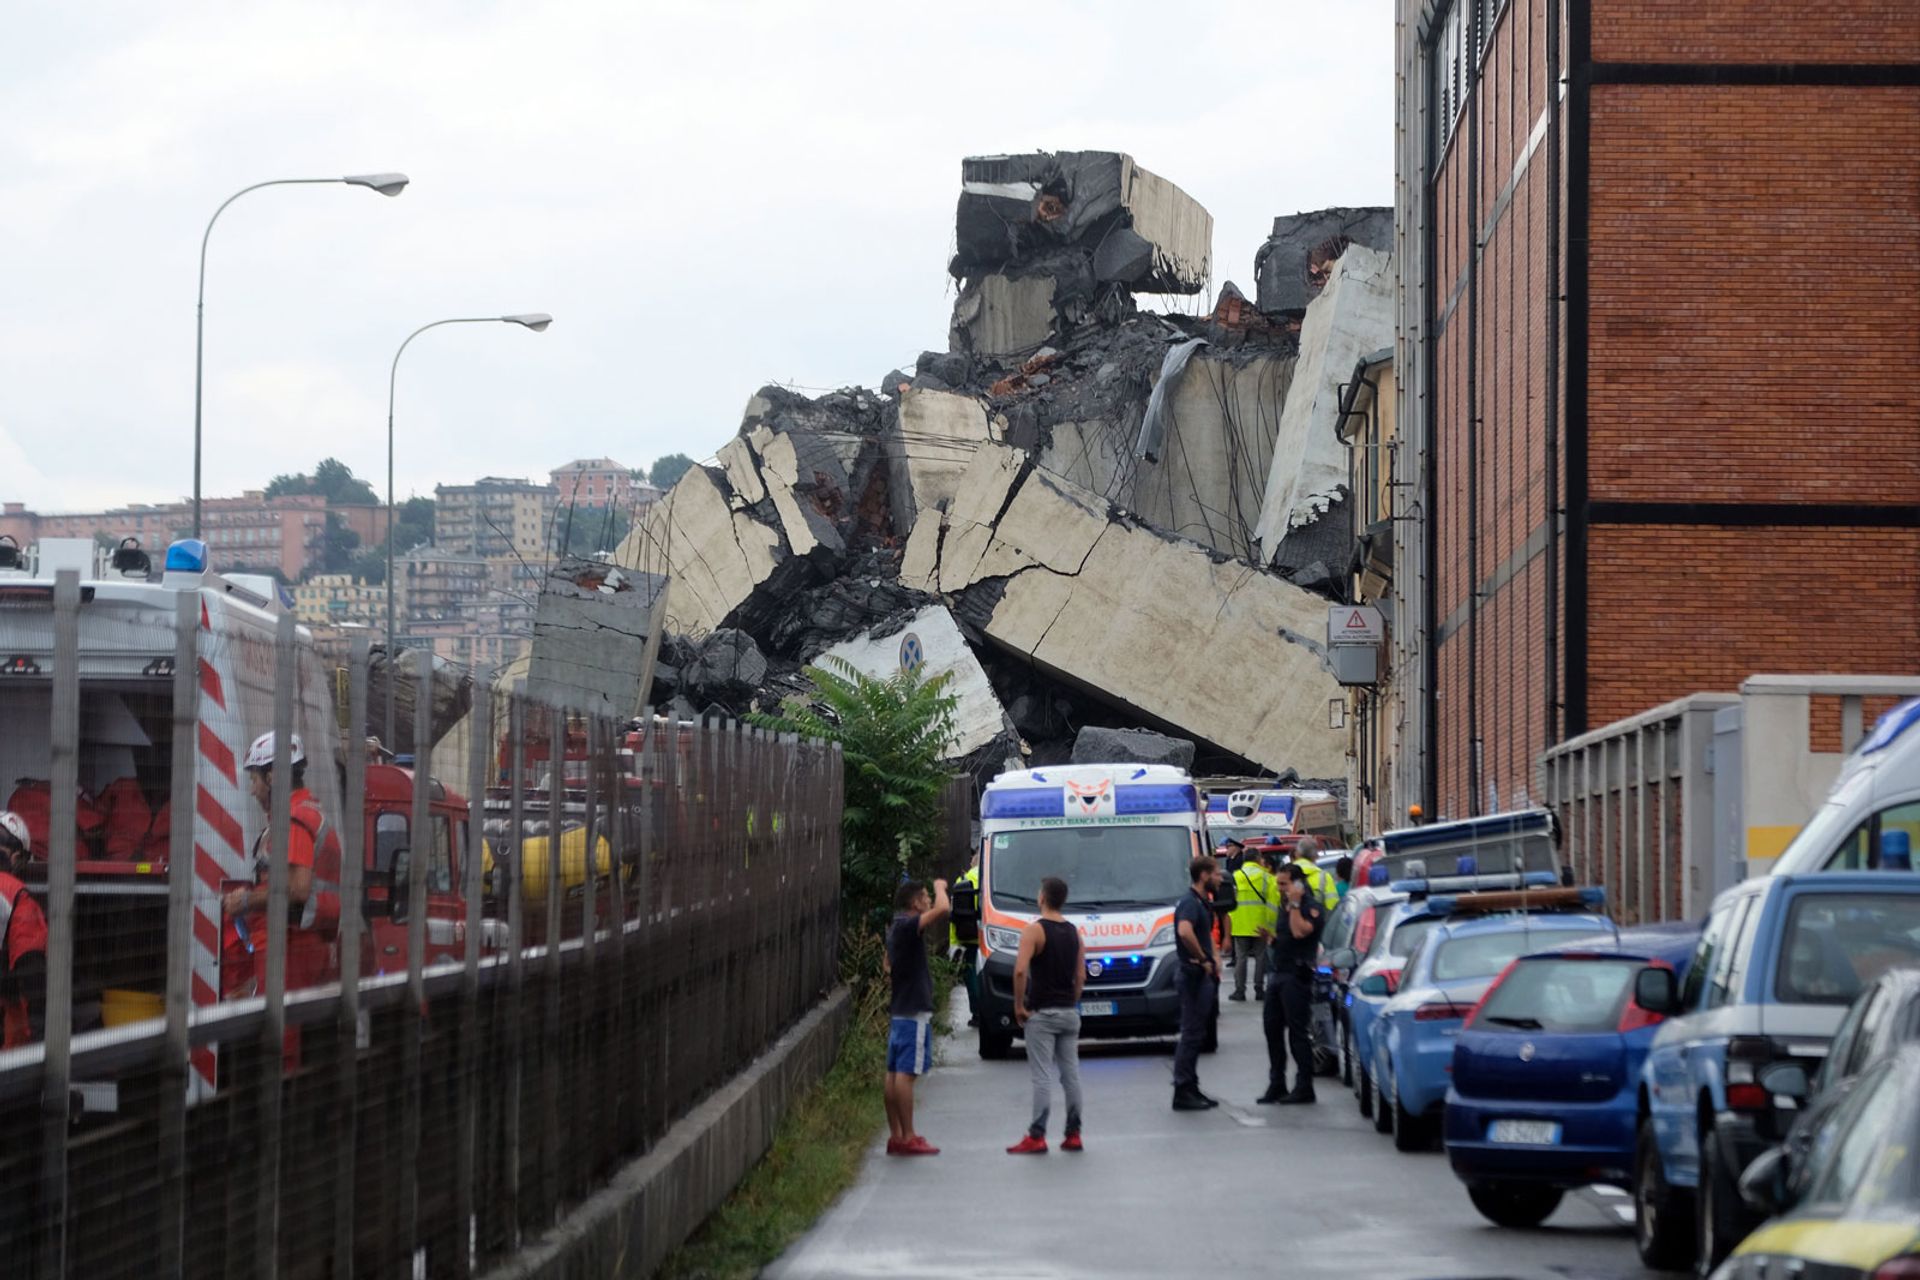 A section of the giant motorway bridge that collapsed in Genoa killing at least 39 people © Photo: Andrea Leoni / AFP